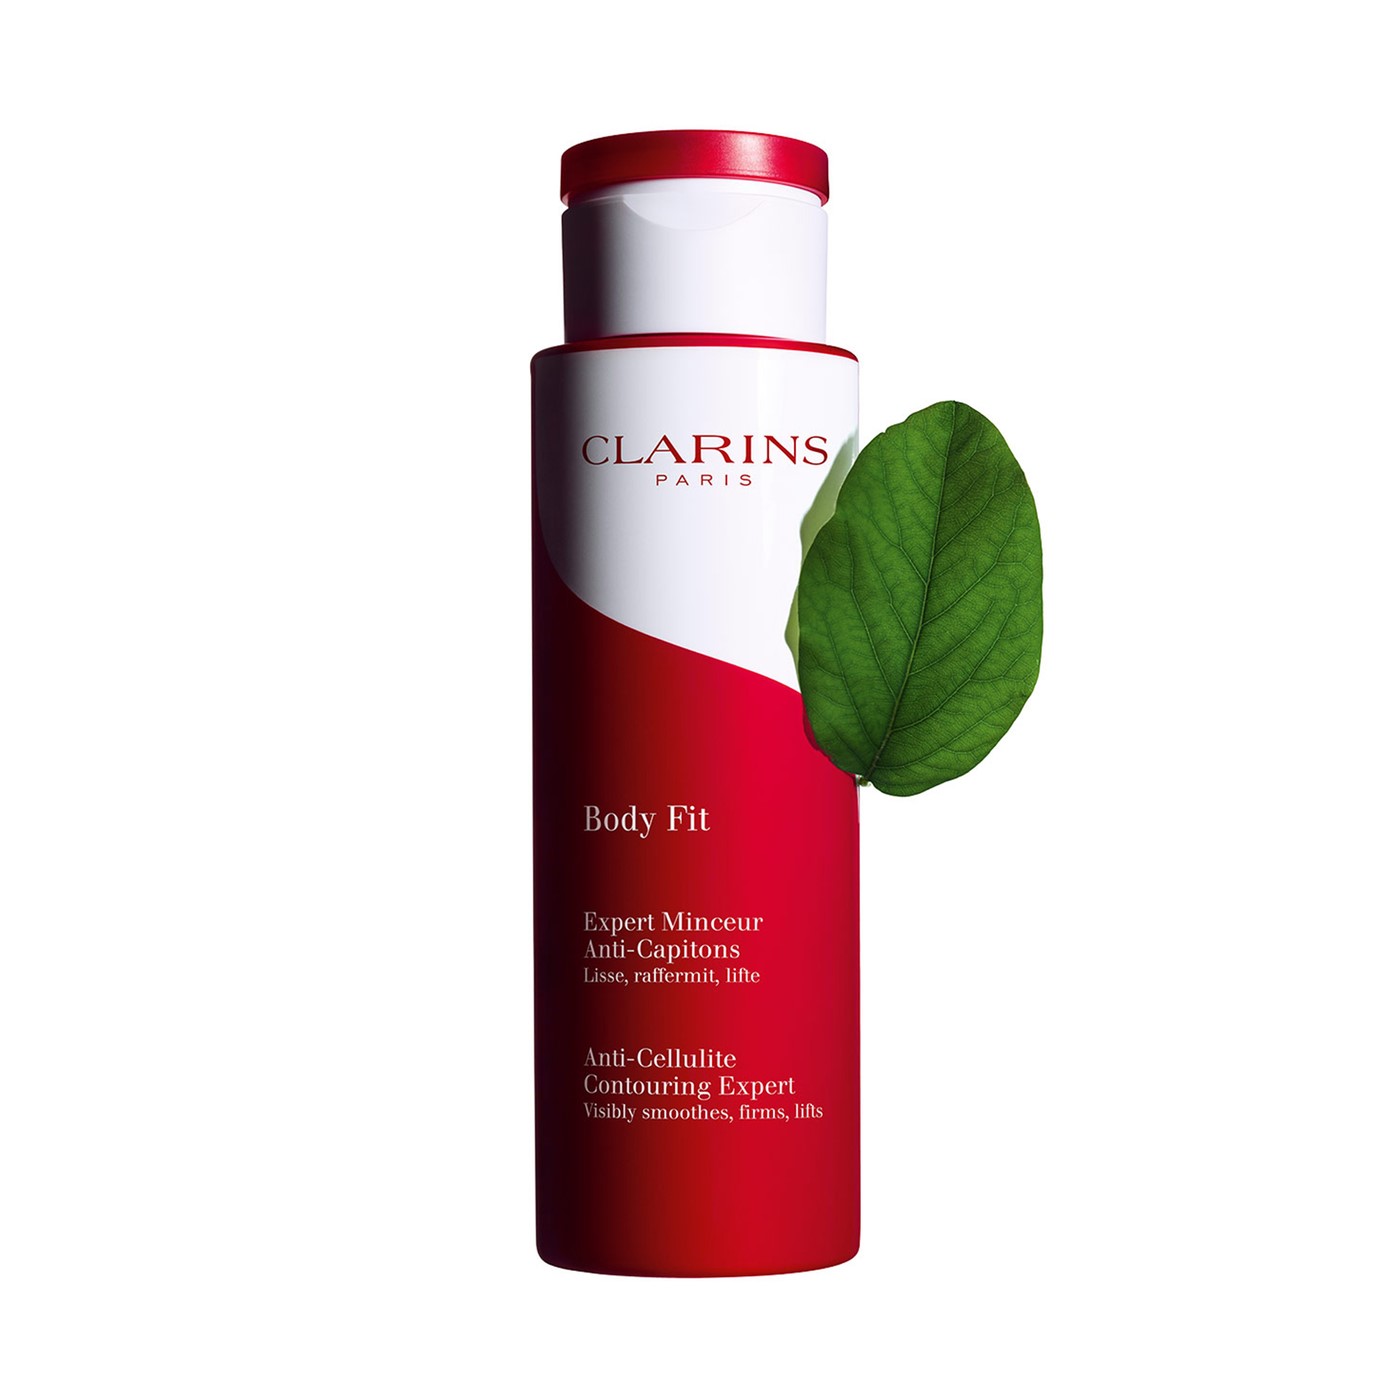 Body Fit Anti-Cellulite Contouring & Firming Expert - Clarins